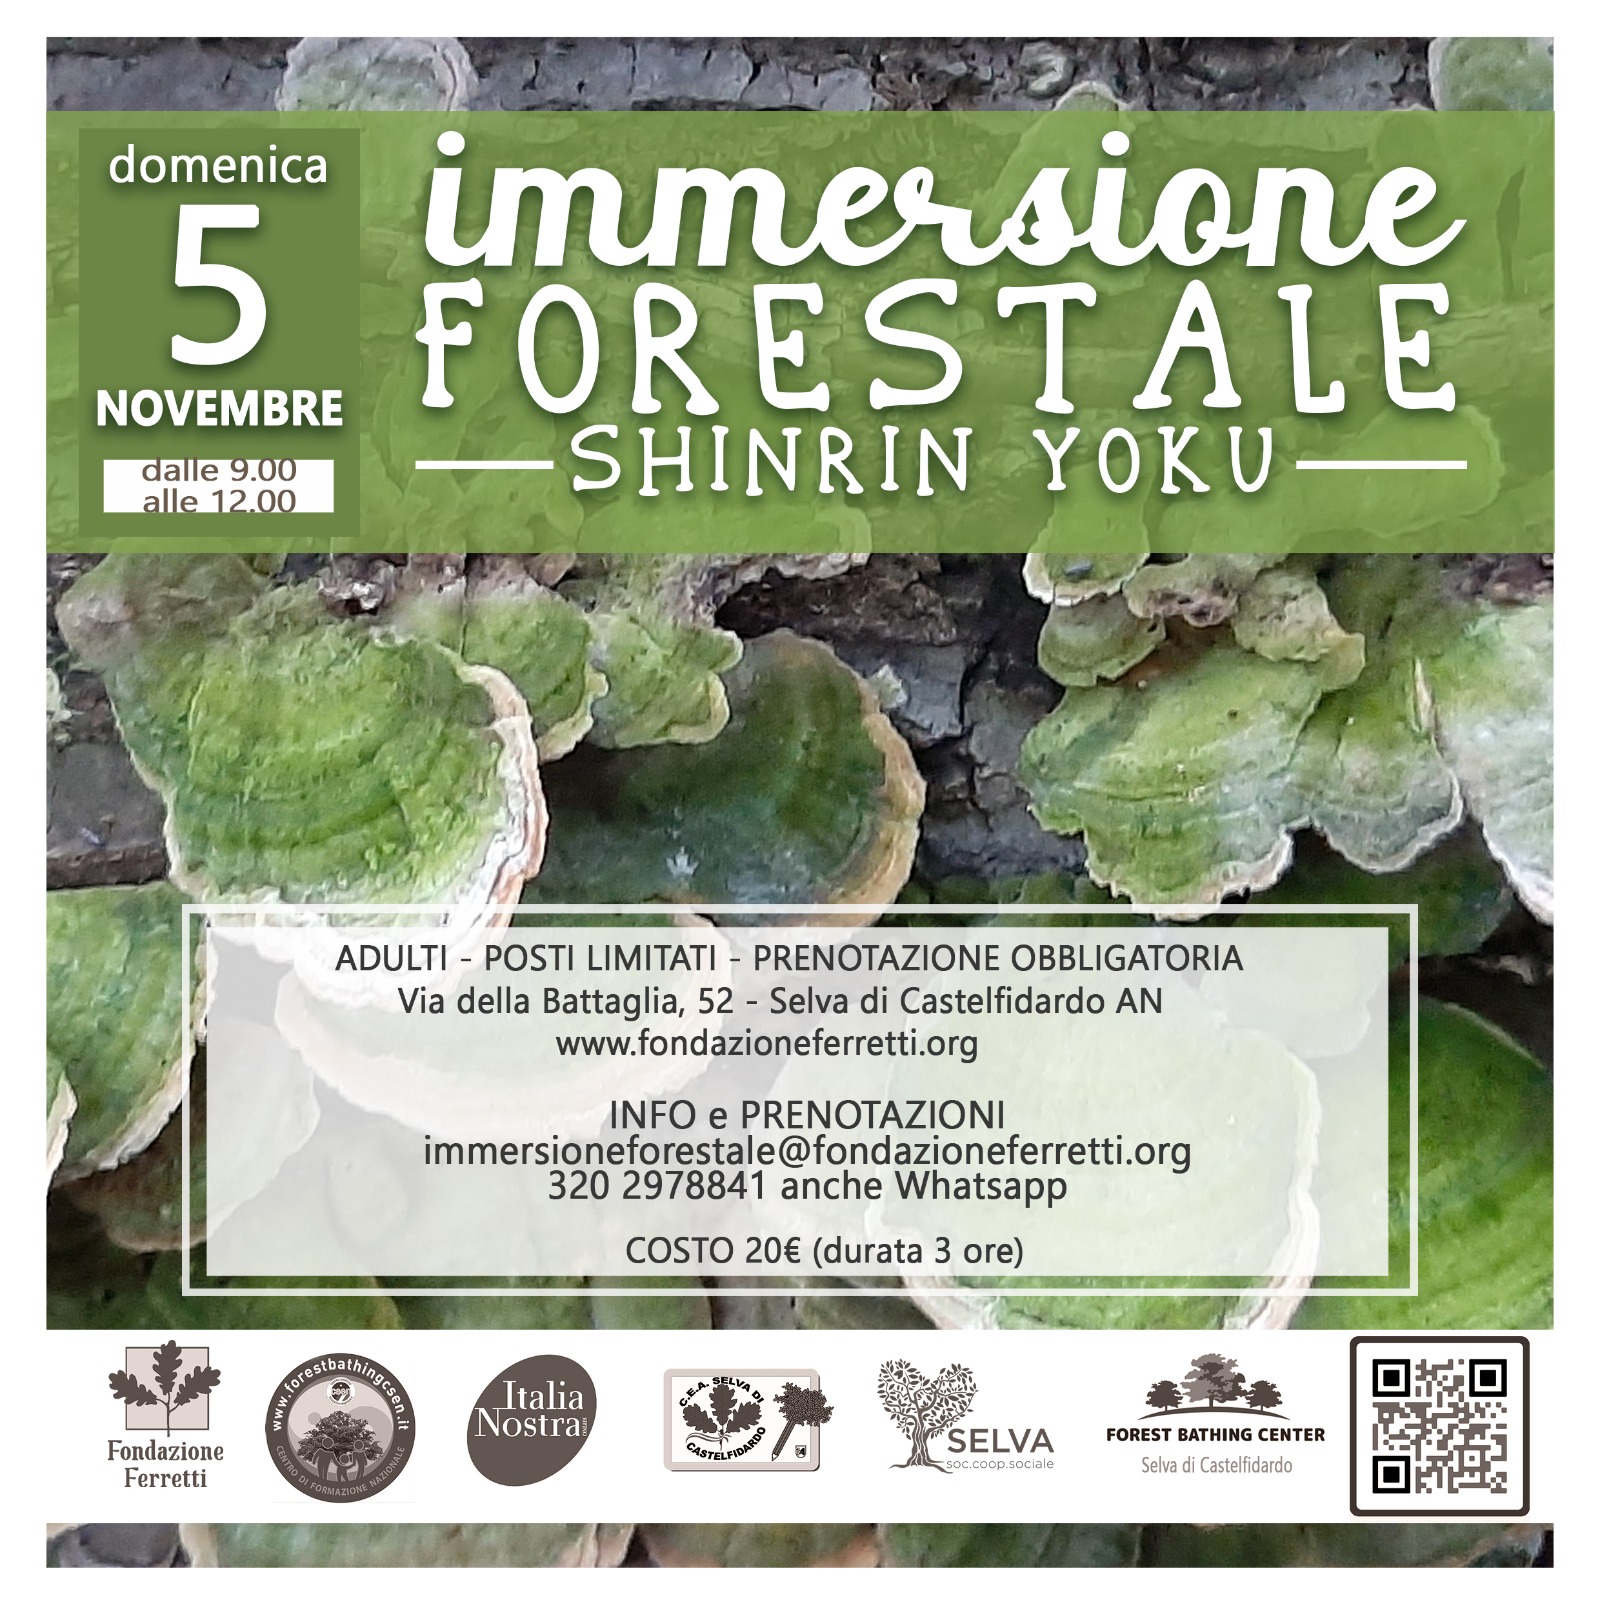 IMMERSIONE FORESTALE